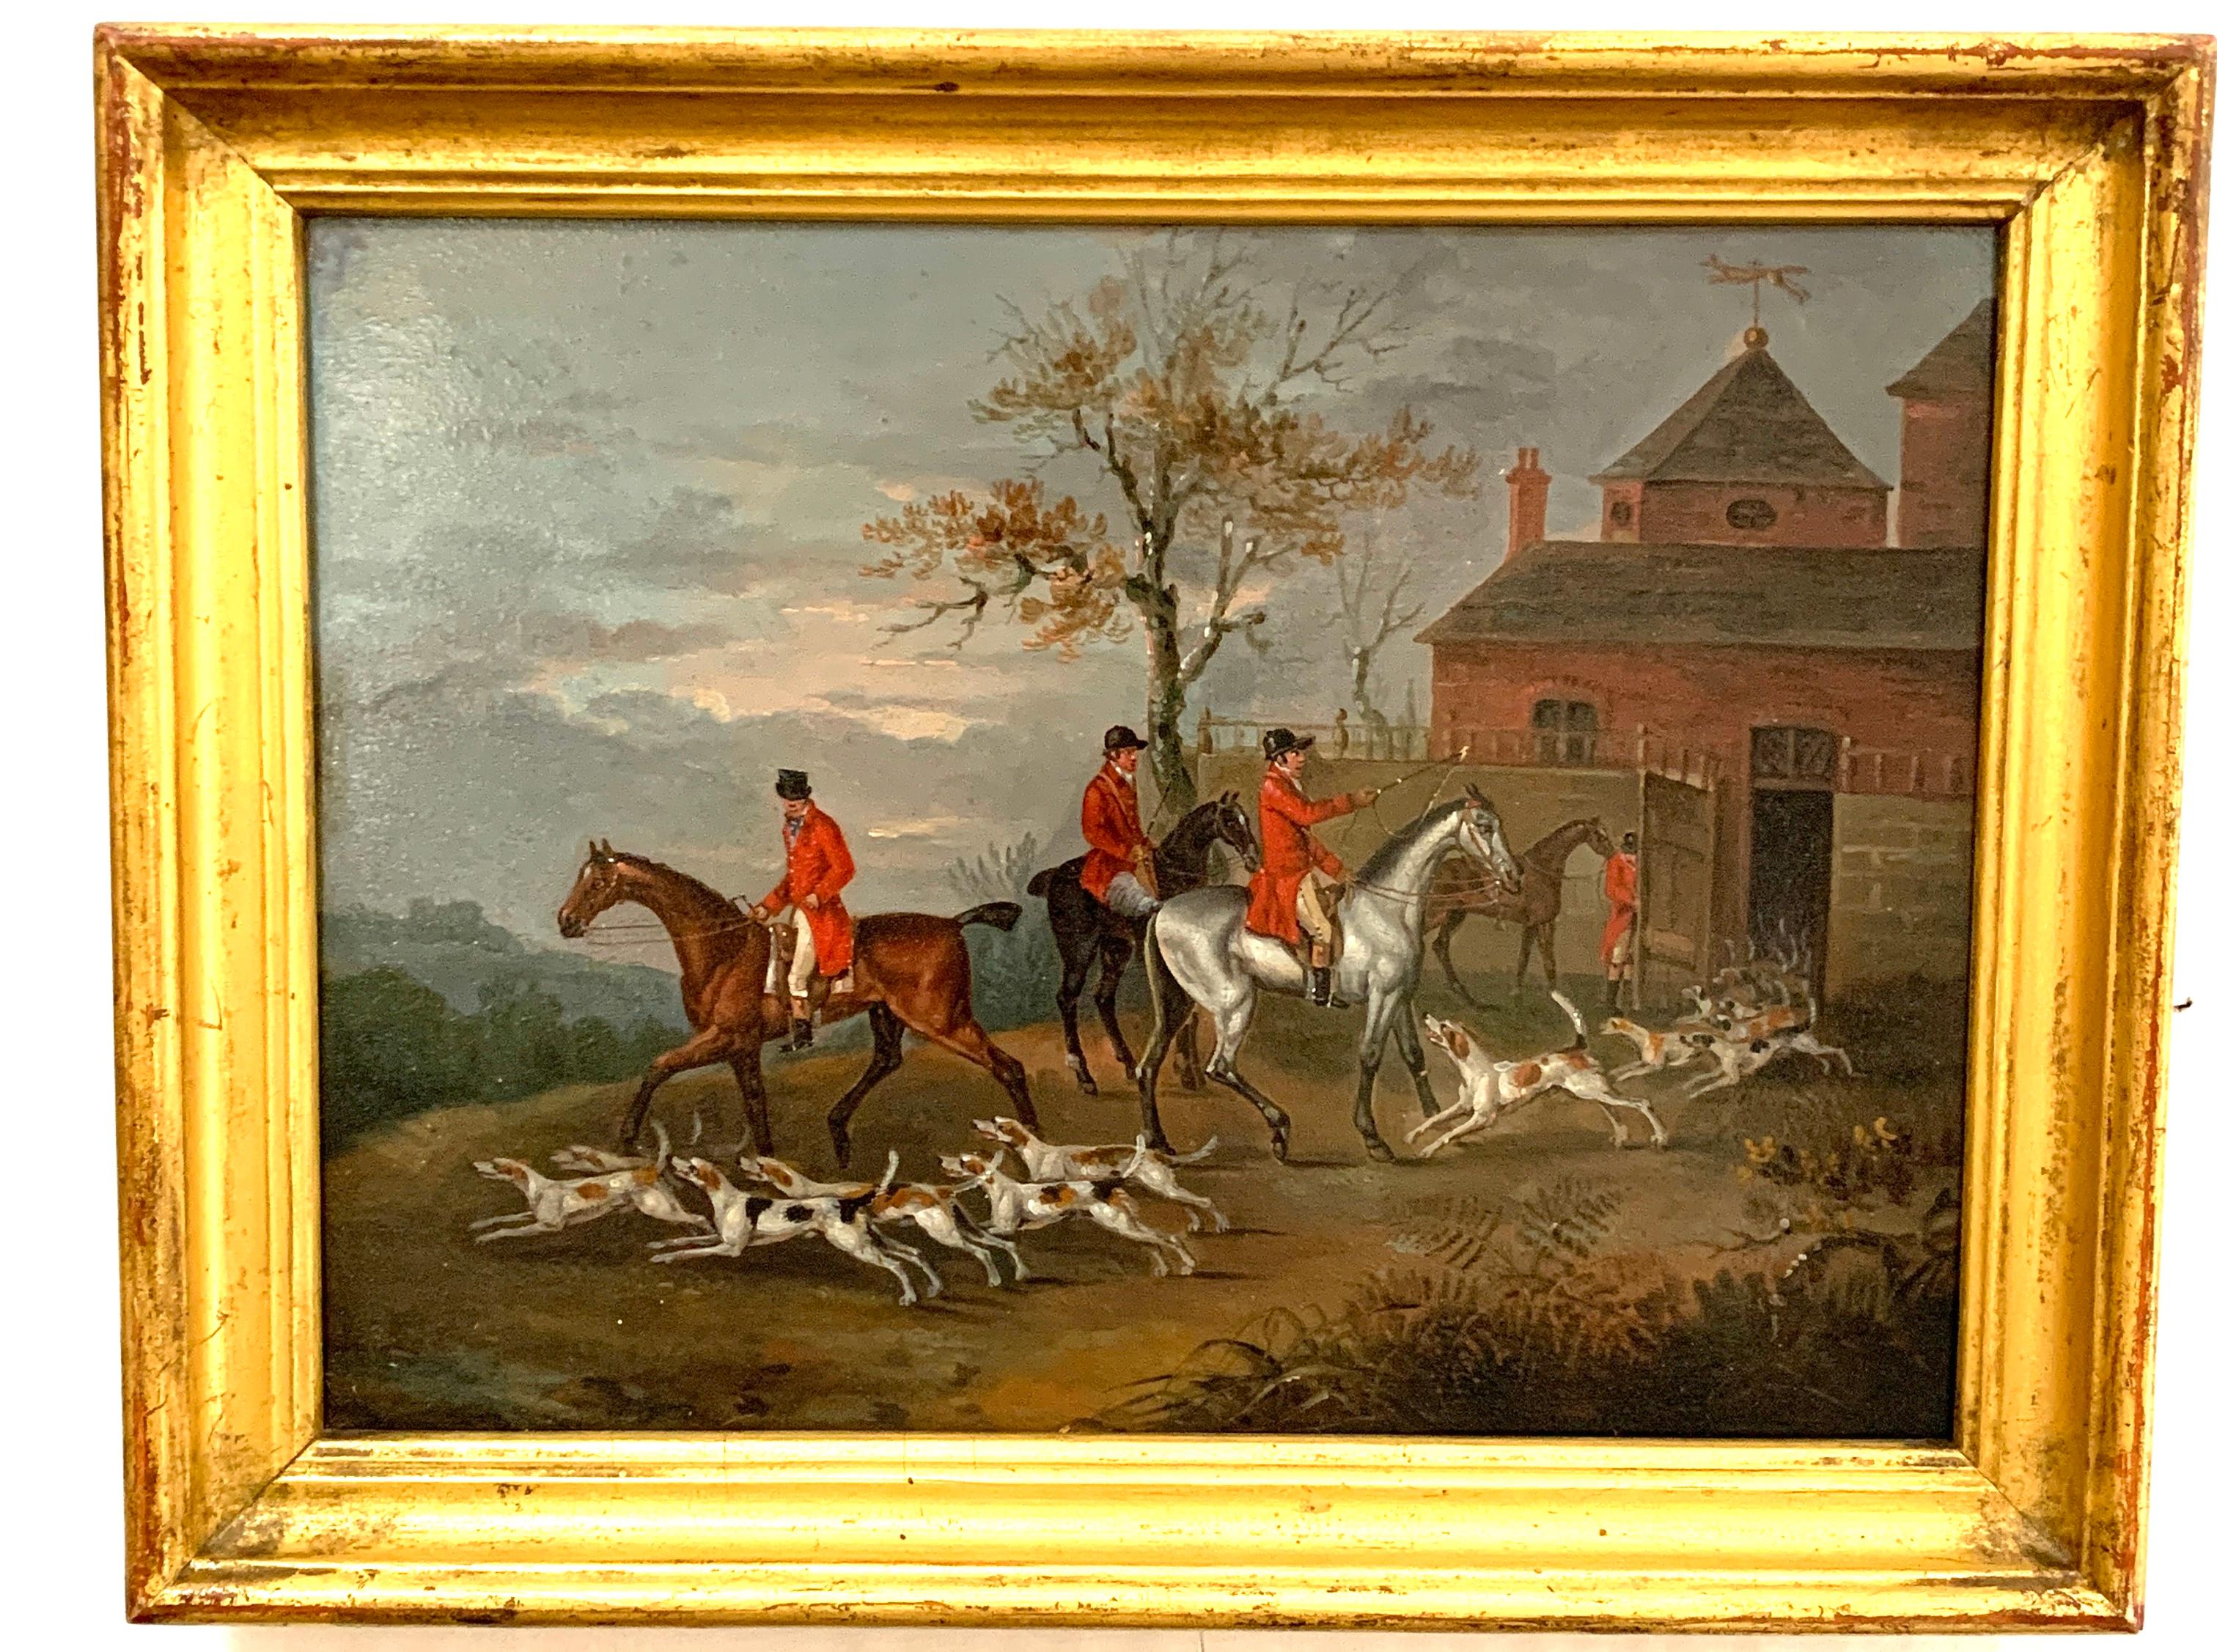 Set of 4 early 19th century Fox hunting landscape with men in red upon horseback - Victorian Painting by John Nost Sartorius